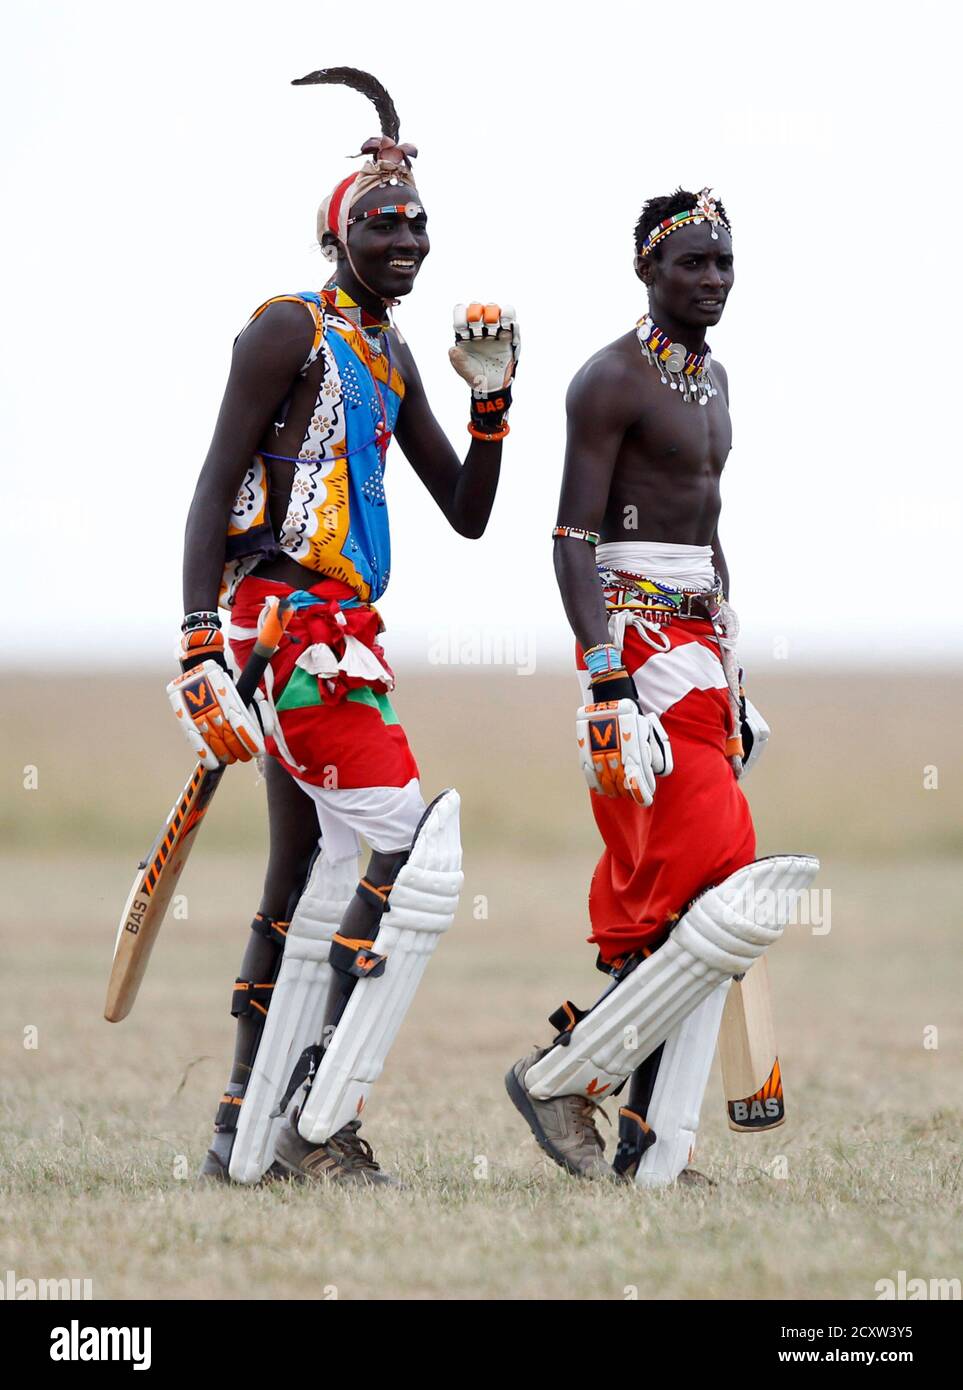 Sonyanga Olengais (R), captain of the Maasai Cricket Warriors, and his teammate Thomas Takare walk during their T20 cricket match against the Ambassadors of Cricket from India in Ol Pejeta conservency in Laikipia national park, June 6, 2013. The Maasai Cricket Warriors are role models in their communities where they actively campaign against retrogressive and harmful cultural practices, such as female genital mutilation and early childhood marriages, while fighting to eradicate discrimination against women in Maasailand. Through cricket, they hope to promote healthier lifestyles and to also sp Stock Photo